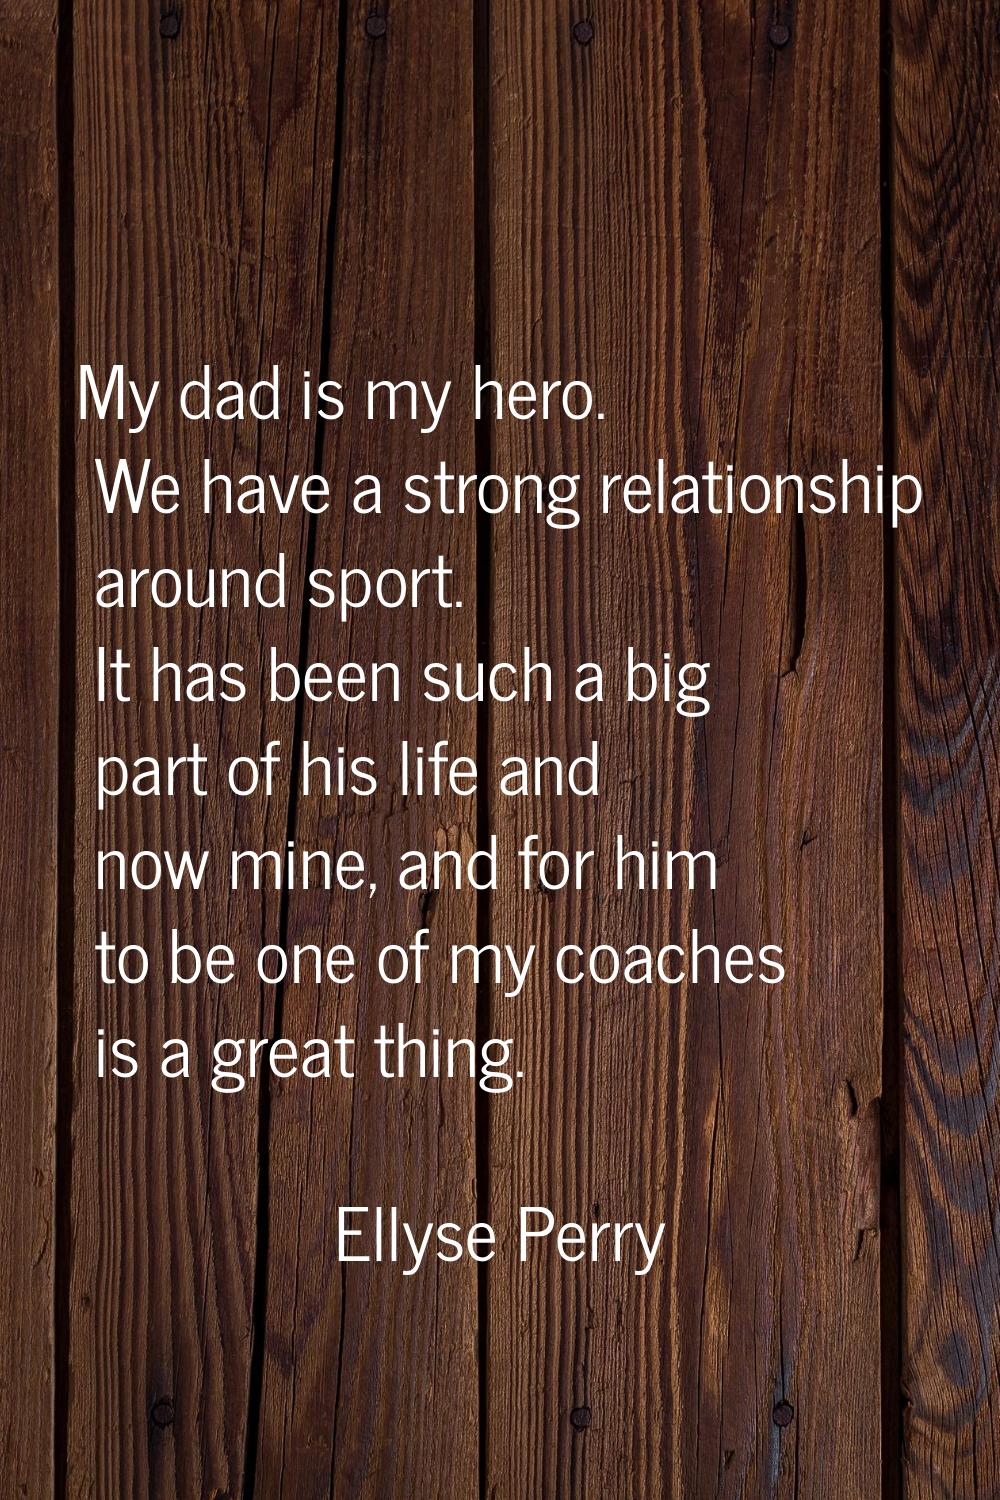 My dad is my hero. We have a strong relationship around sport. It has been such a big part of his l